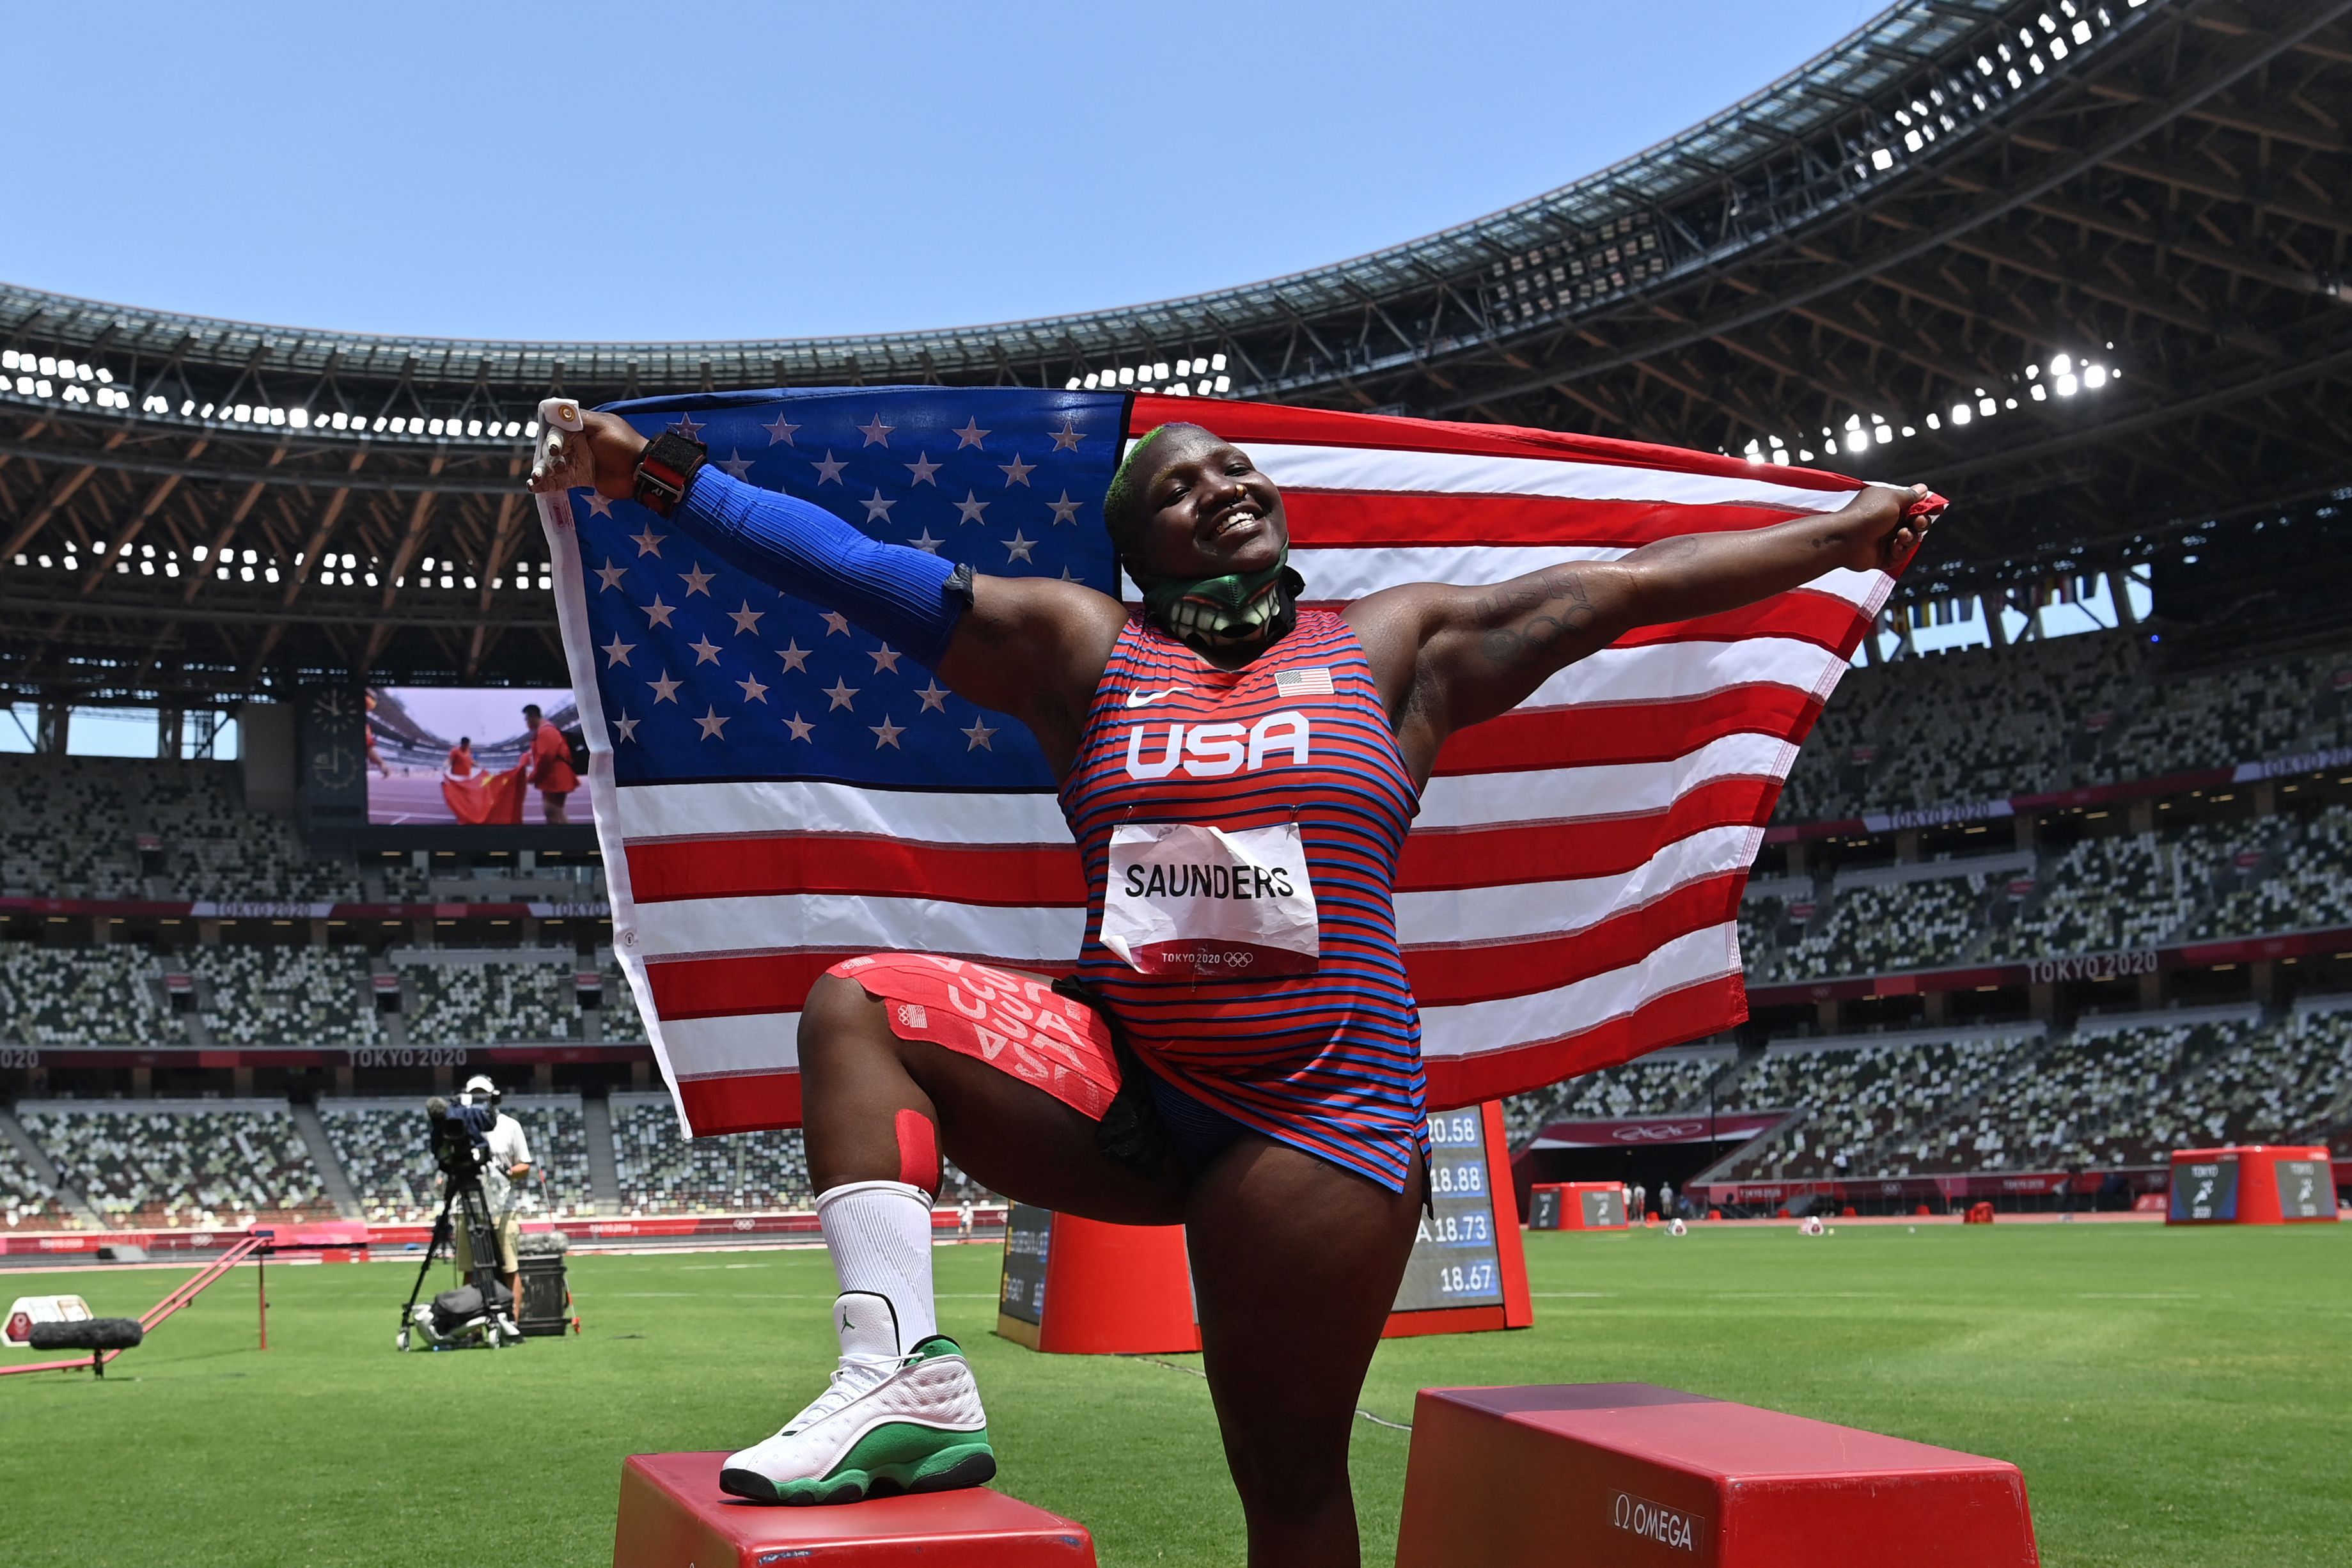  USA's Raven Saunders celebrates with her national flag after placing second in the women's shot put final during the Tokyo 2020 Olympic Games at the Olympic Stadium in Tokyo on August 1